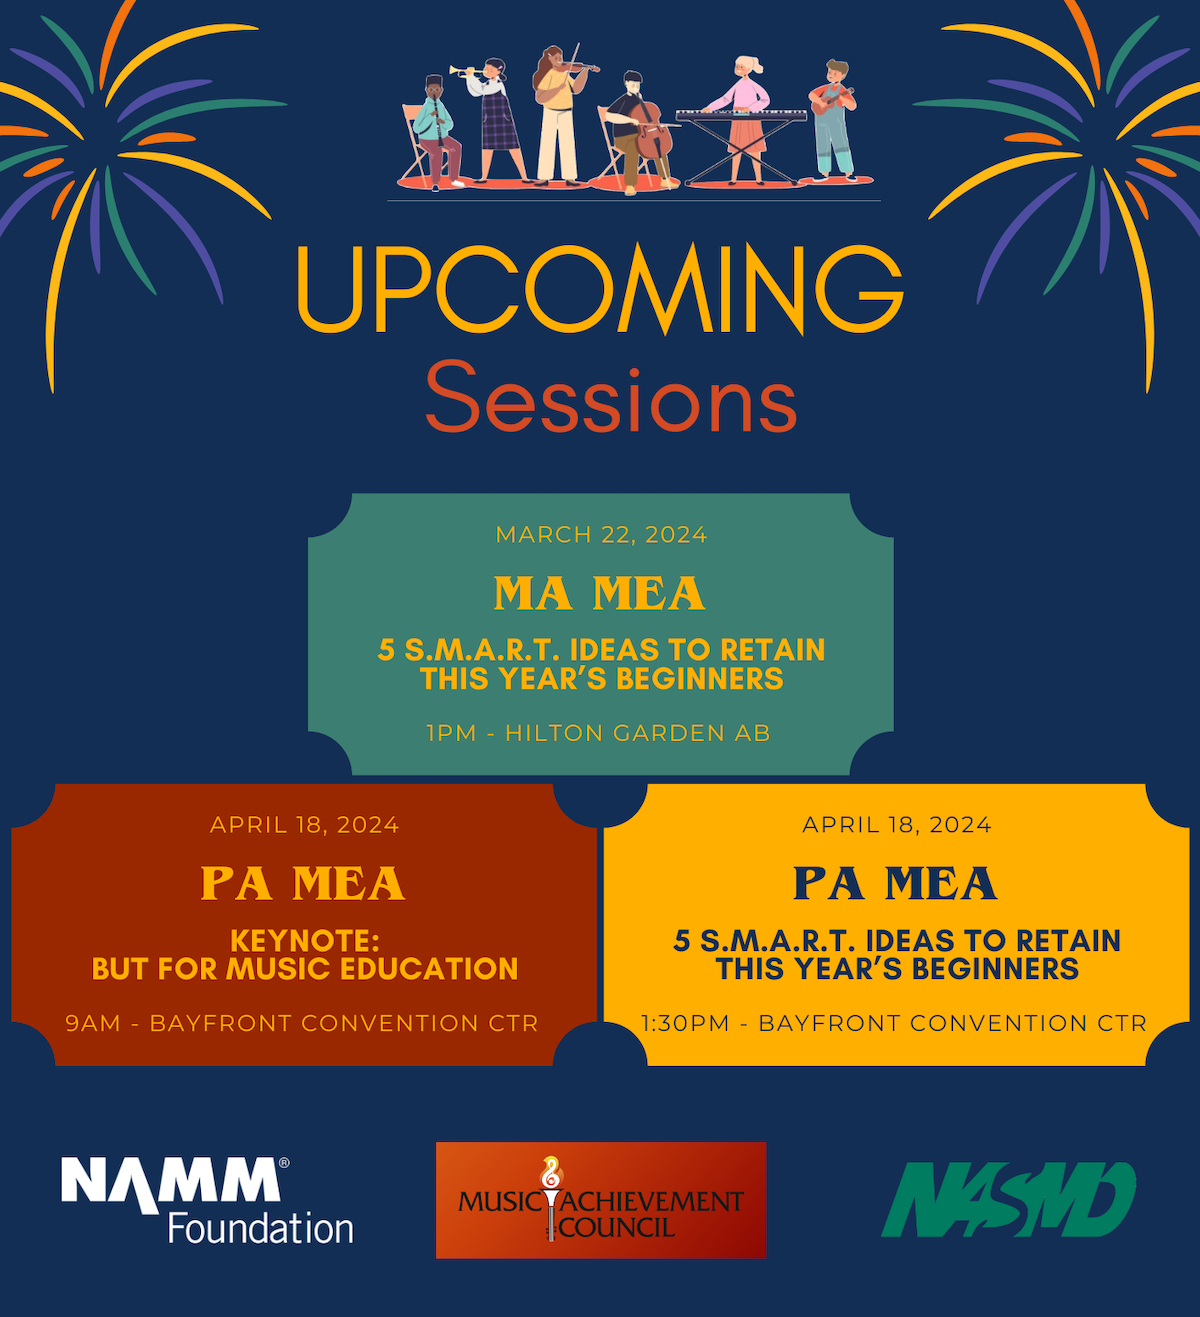 Image of Music Achievement Council's Upcoming Sessions